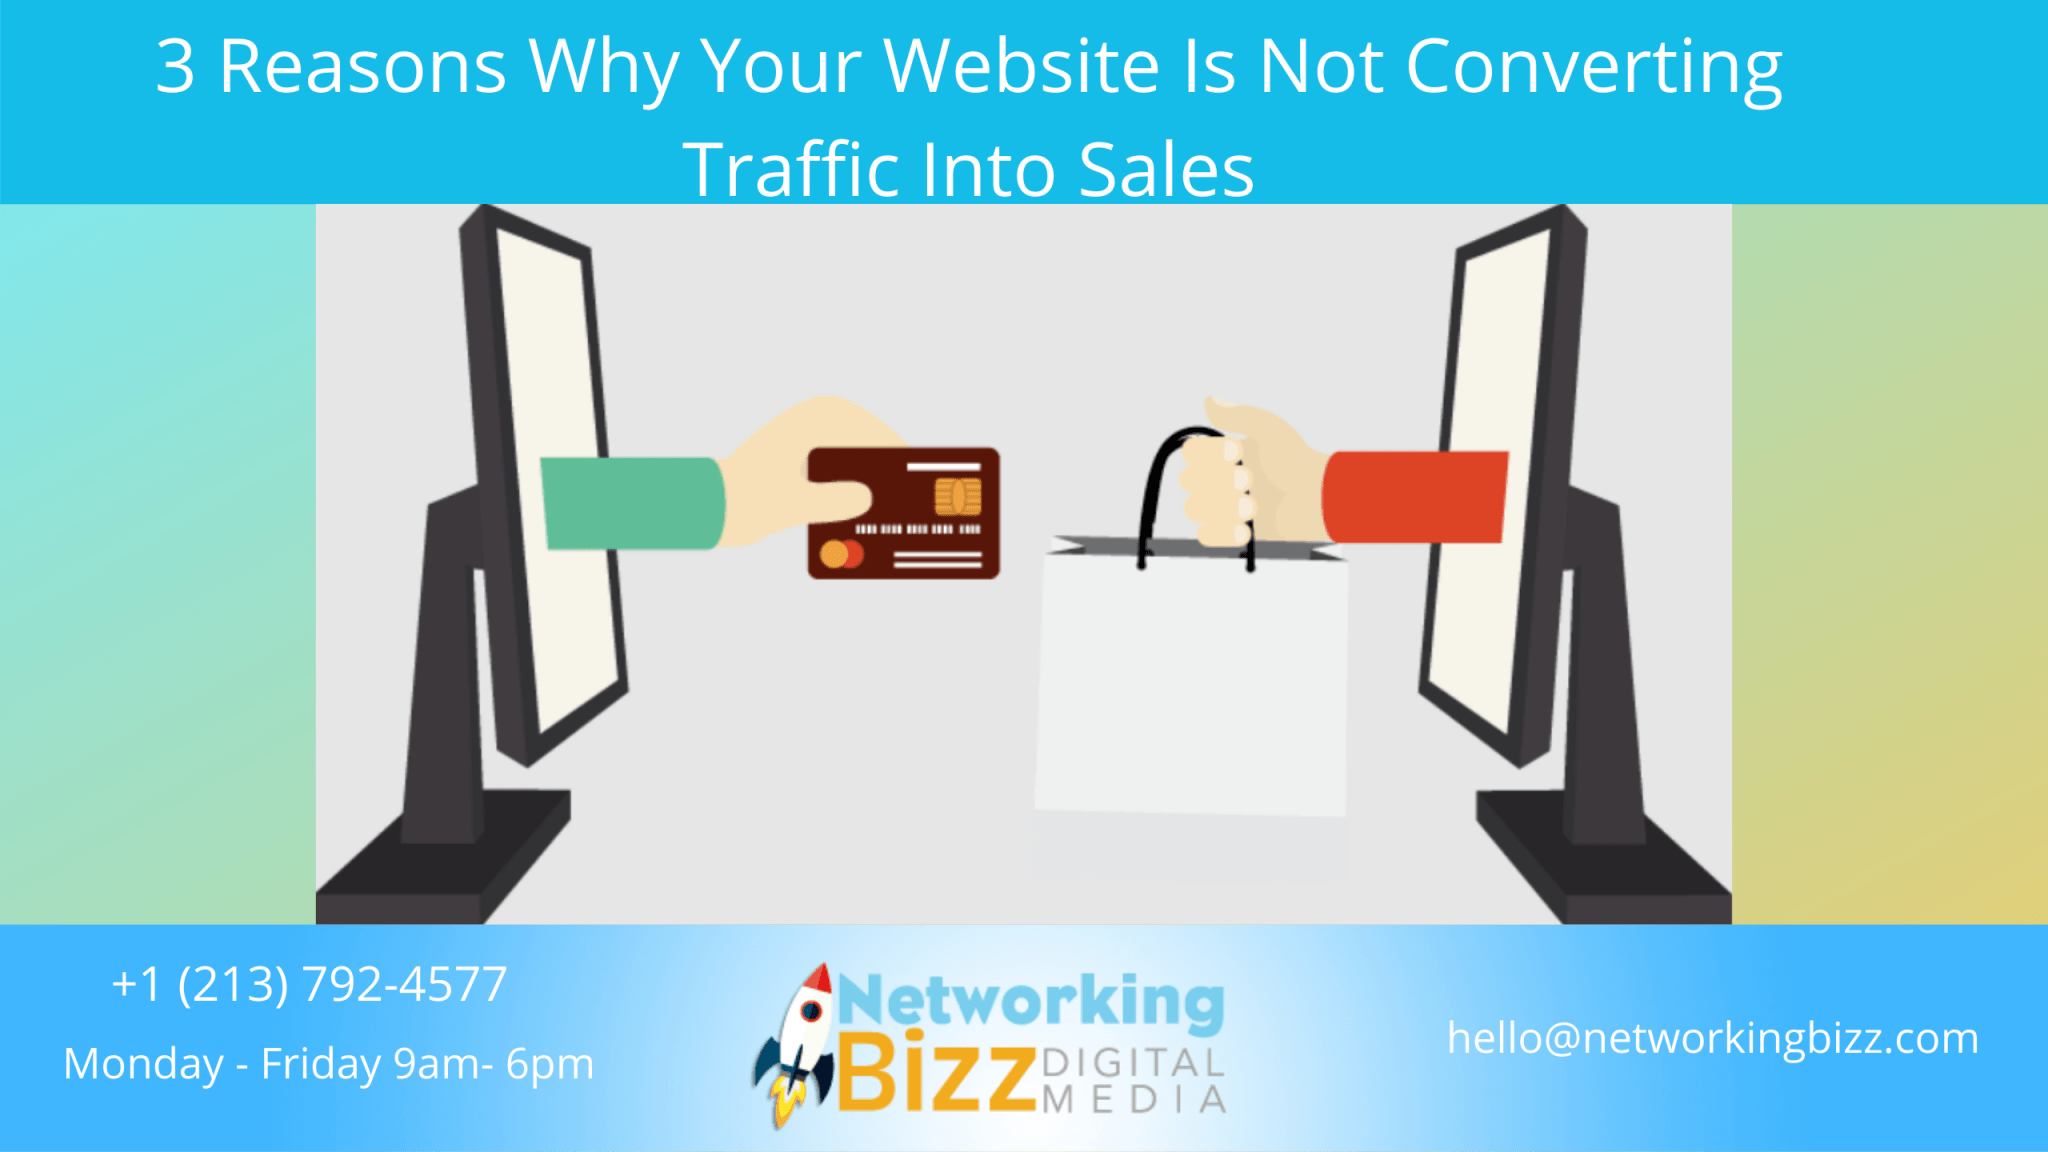 3 Reasons Why Your Website Is Not Converting Traffic Into Sales.